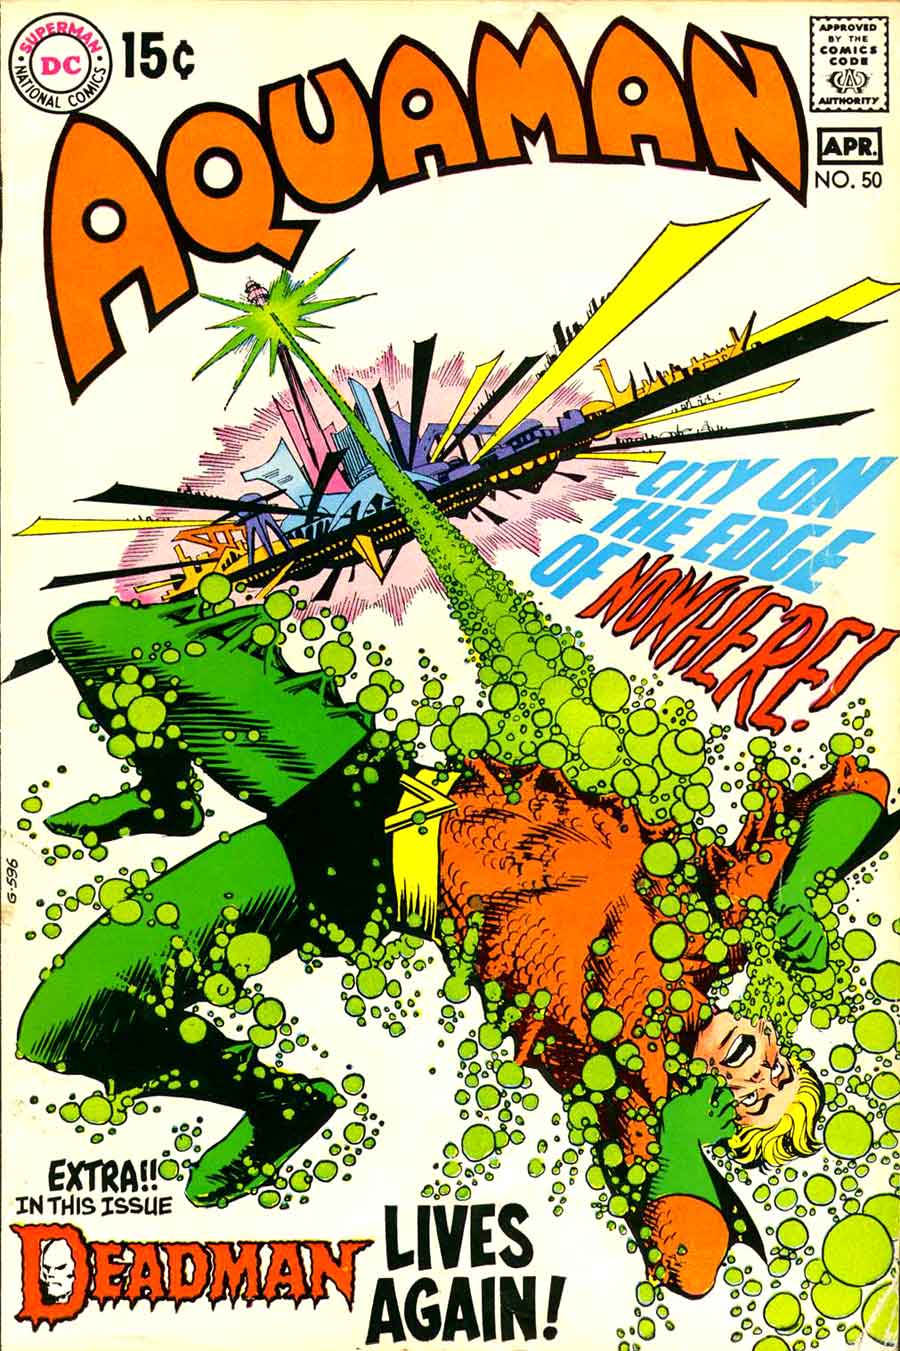 Aquaman v1 #50 dc 1970s bronze age comic book cover art by Nick Cardy